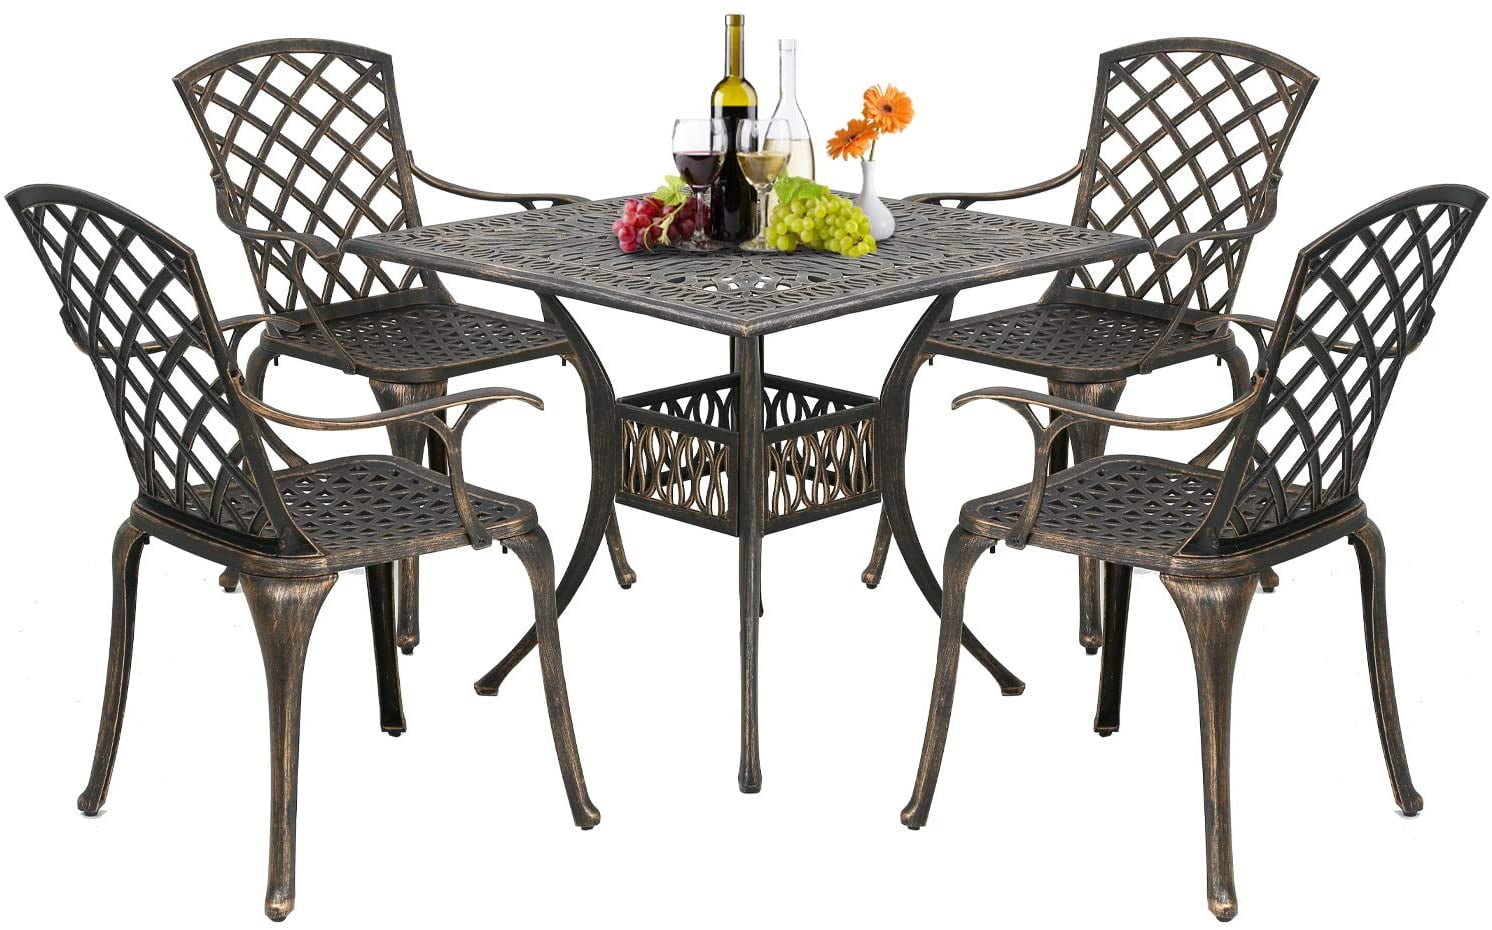 Fdw Outdoor Dining Table Set Patio Dining Set Dining Chairs Set Of 4 Wrought Iron Patio